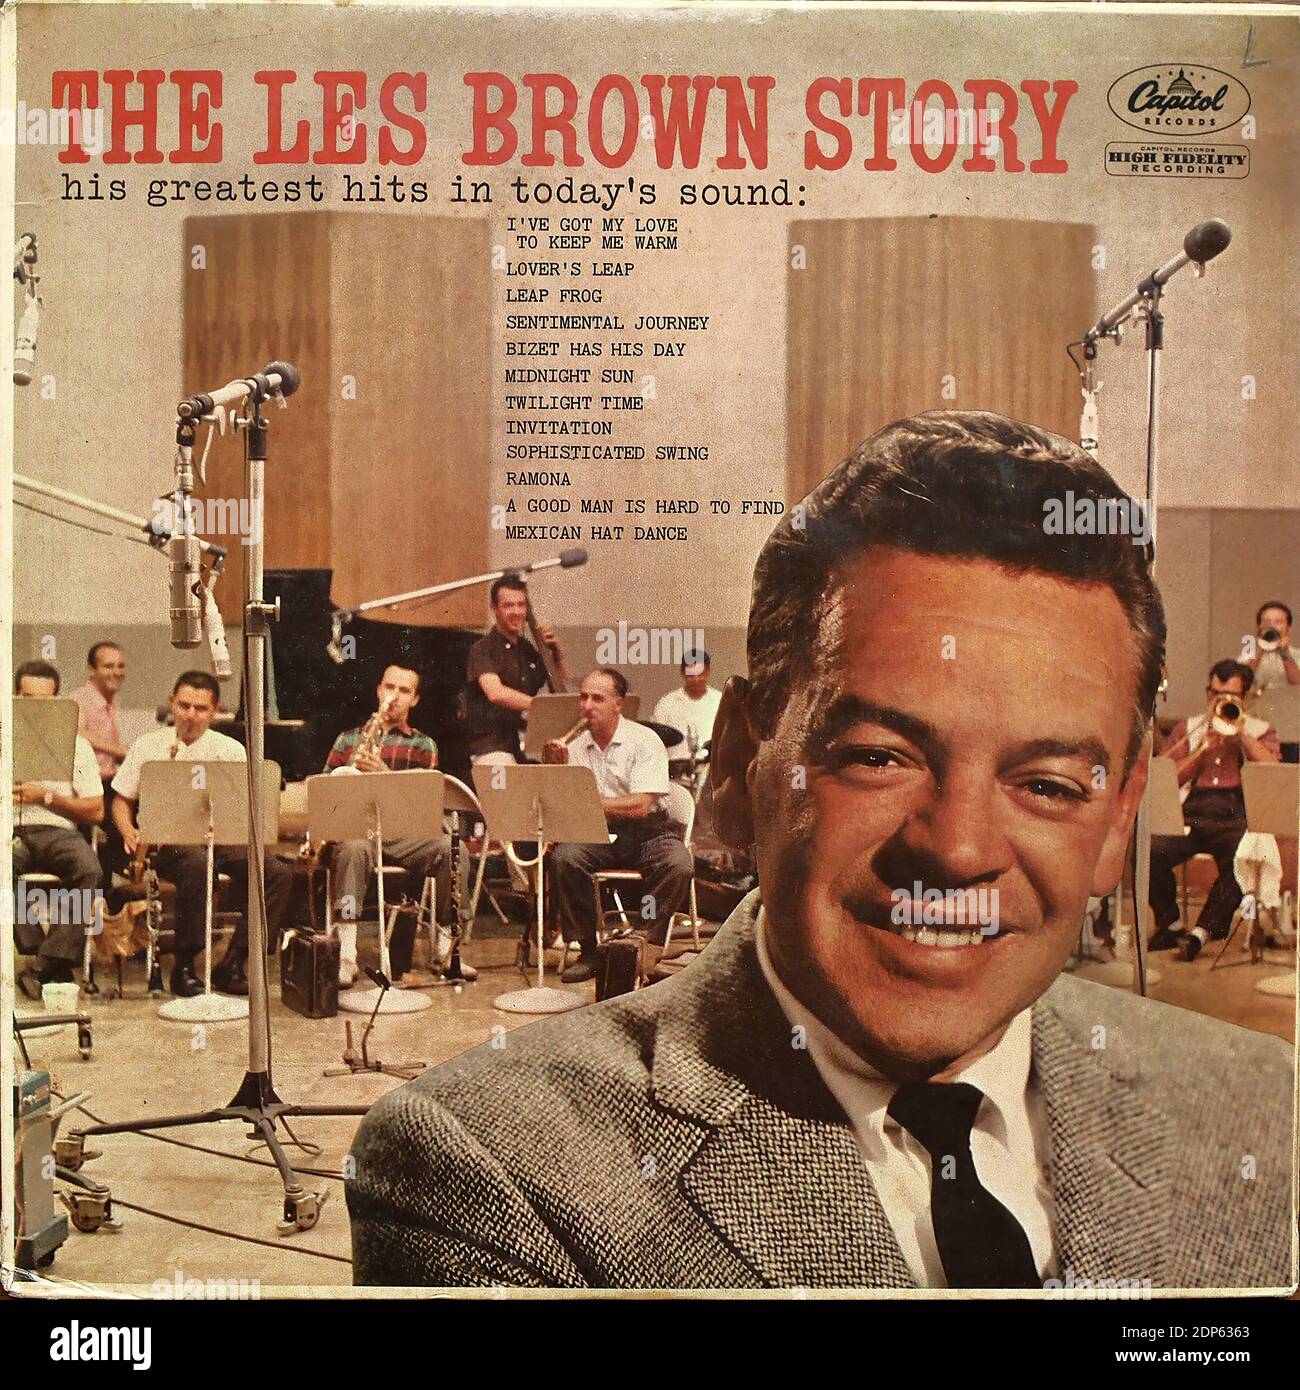 Les Brown And His Band Of Renown - The Les Brown Story, Capitol Records T 1174, 1959  - Vintage vinyl album cover Stock Photo